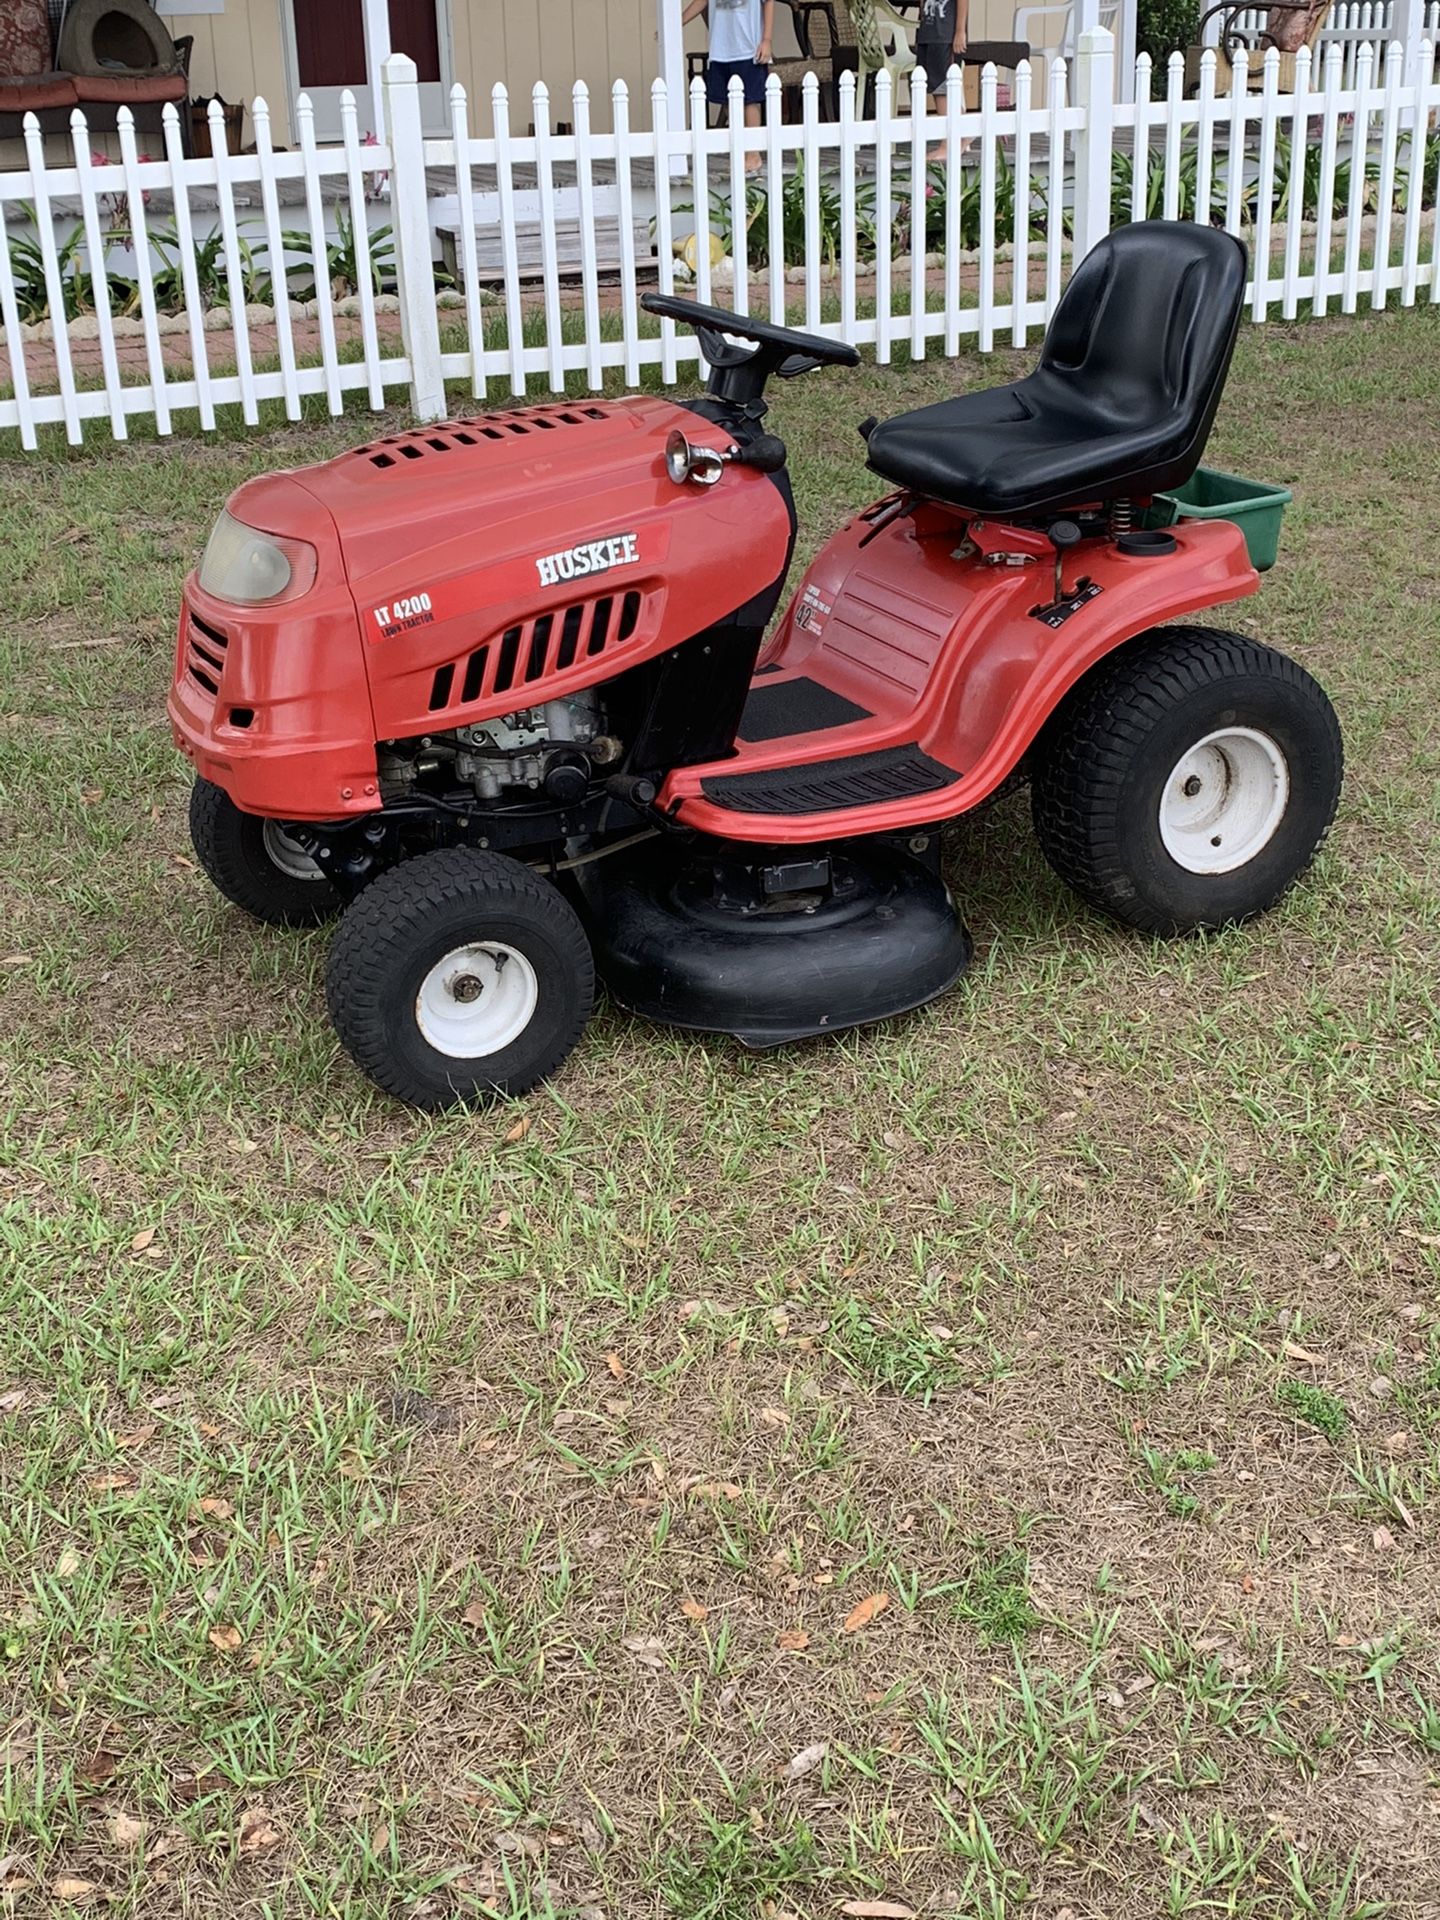 Huskee LT4200 Riding Lawn Mower/tractor Well Maintained